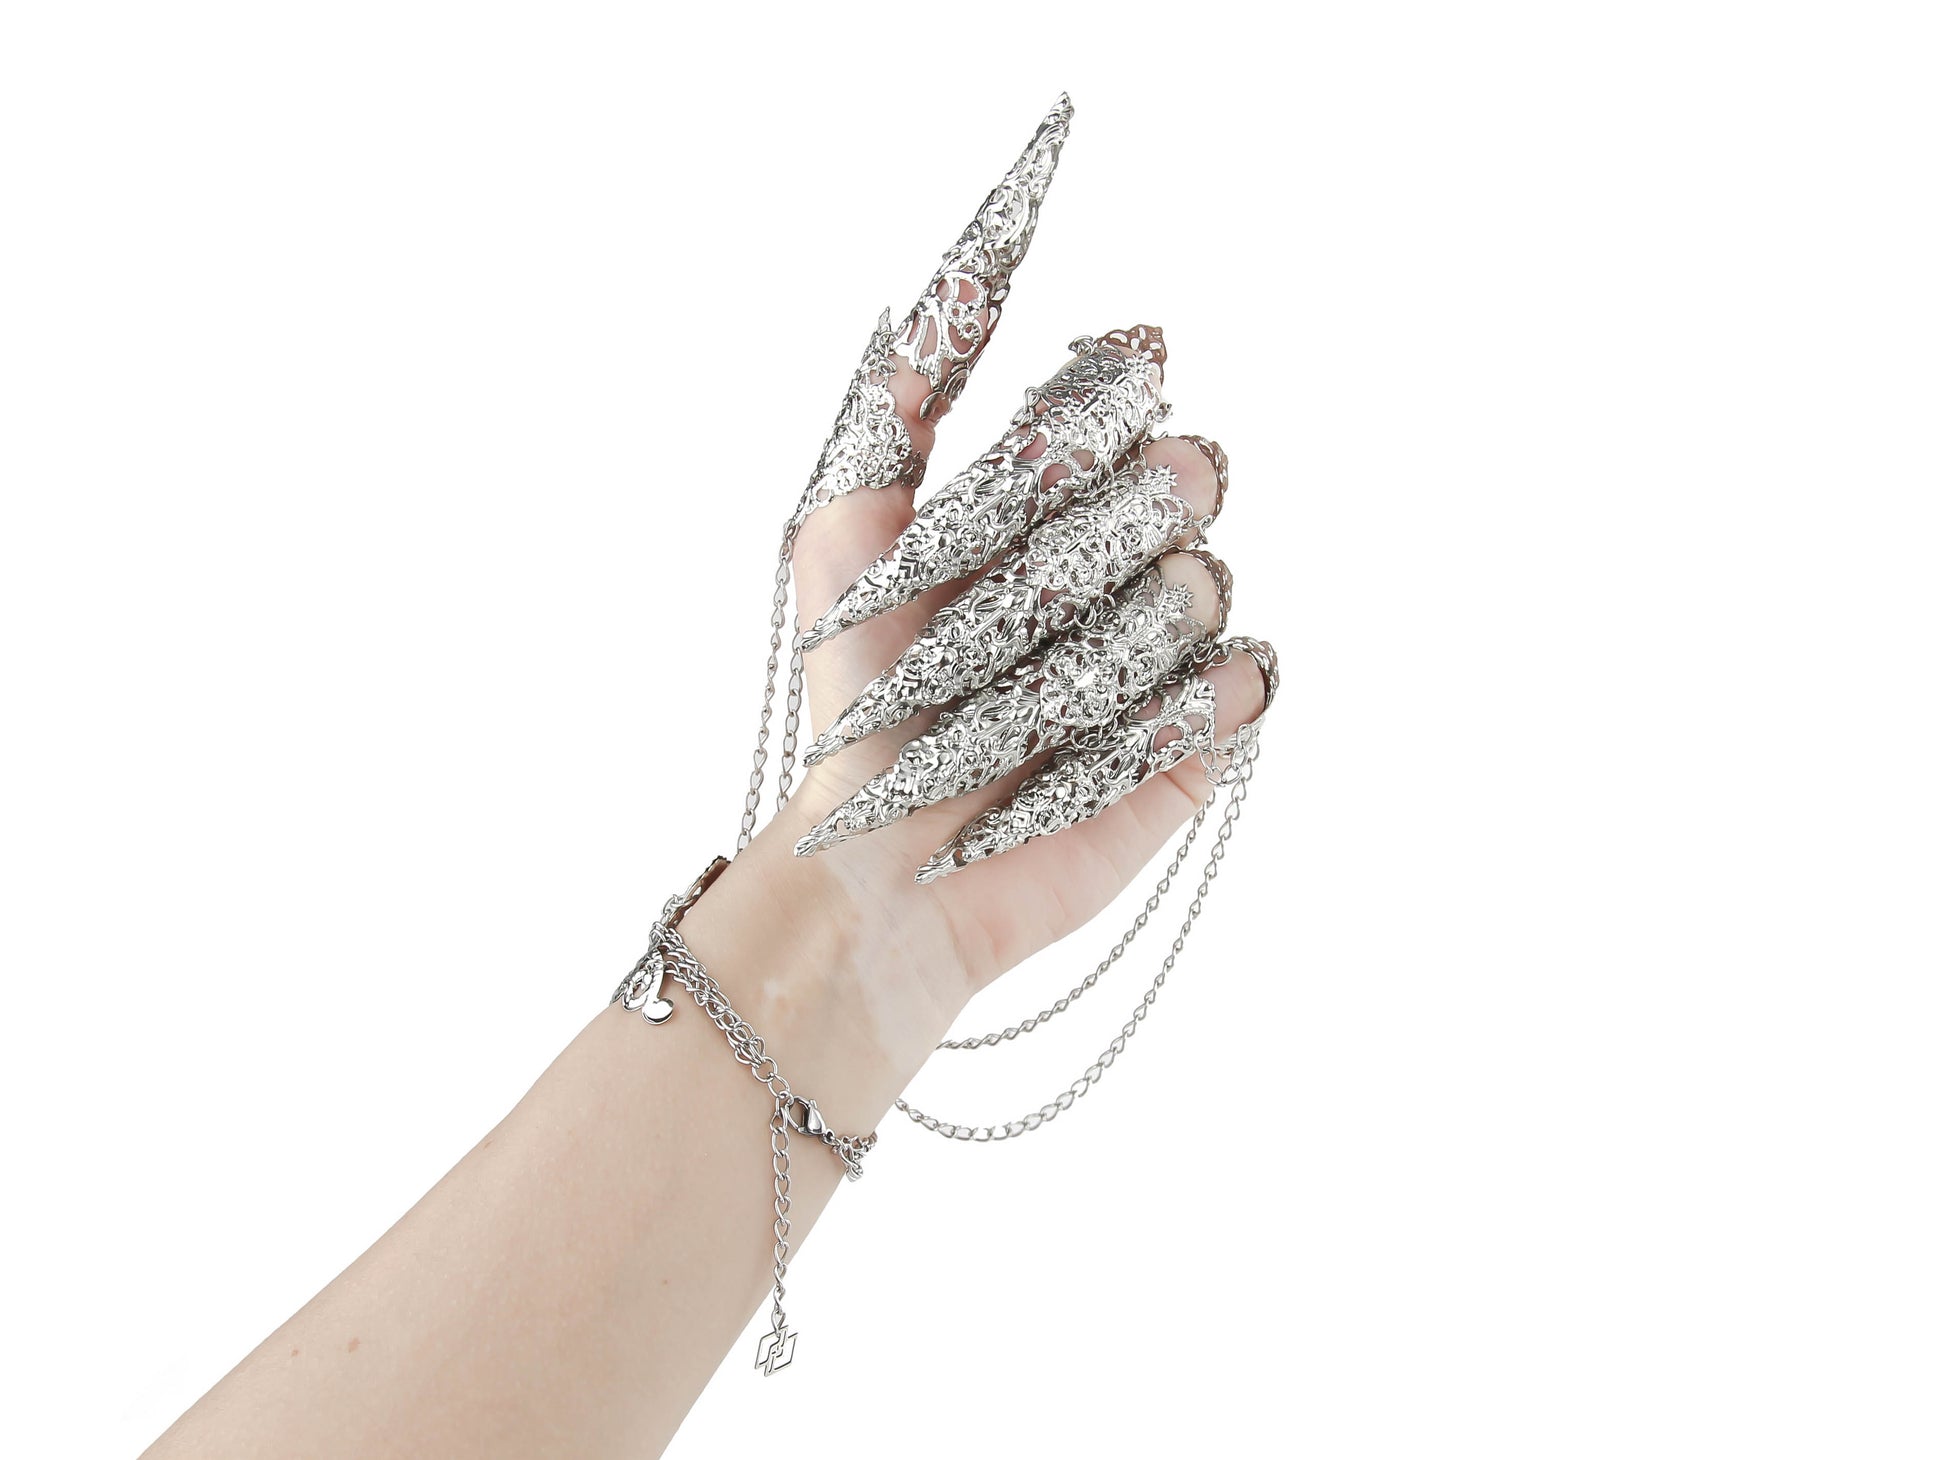 An intricately designed silver metal glove with full finger claw rings by Myril Jewels, embodying the spirit of dark avant-garde fashion. A perfect accessory for goth enthusiasts or a bold statement for festival and rave wear, blending witchcore with neo-gothic craftsmanship